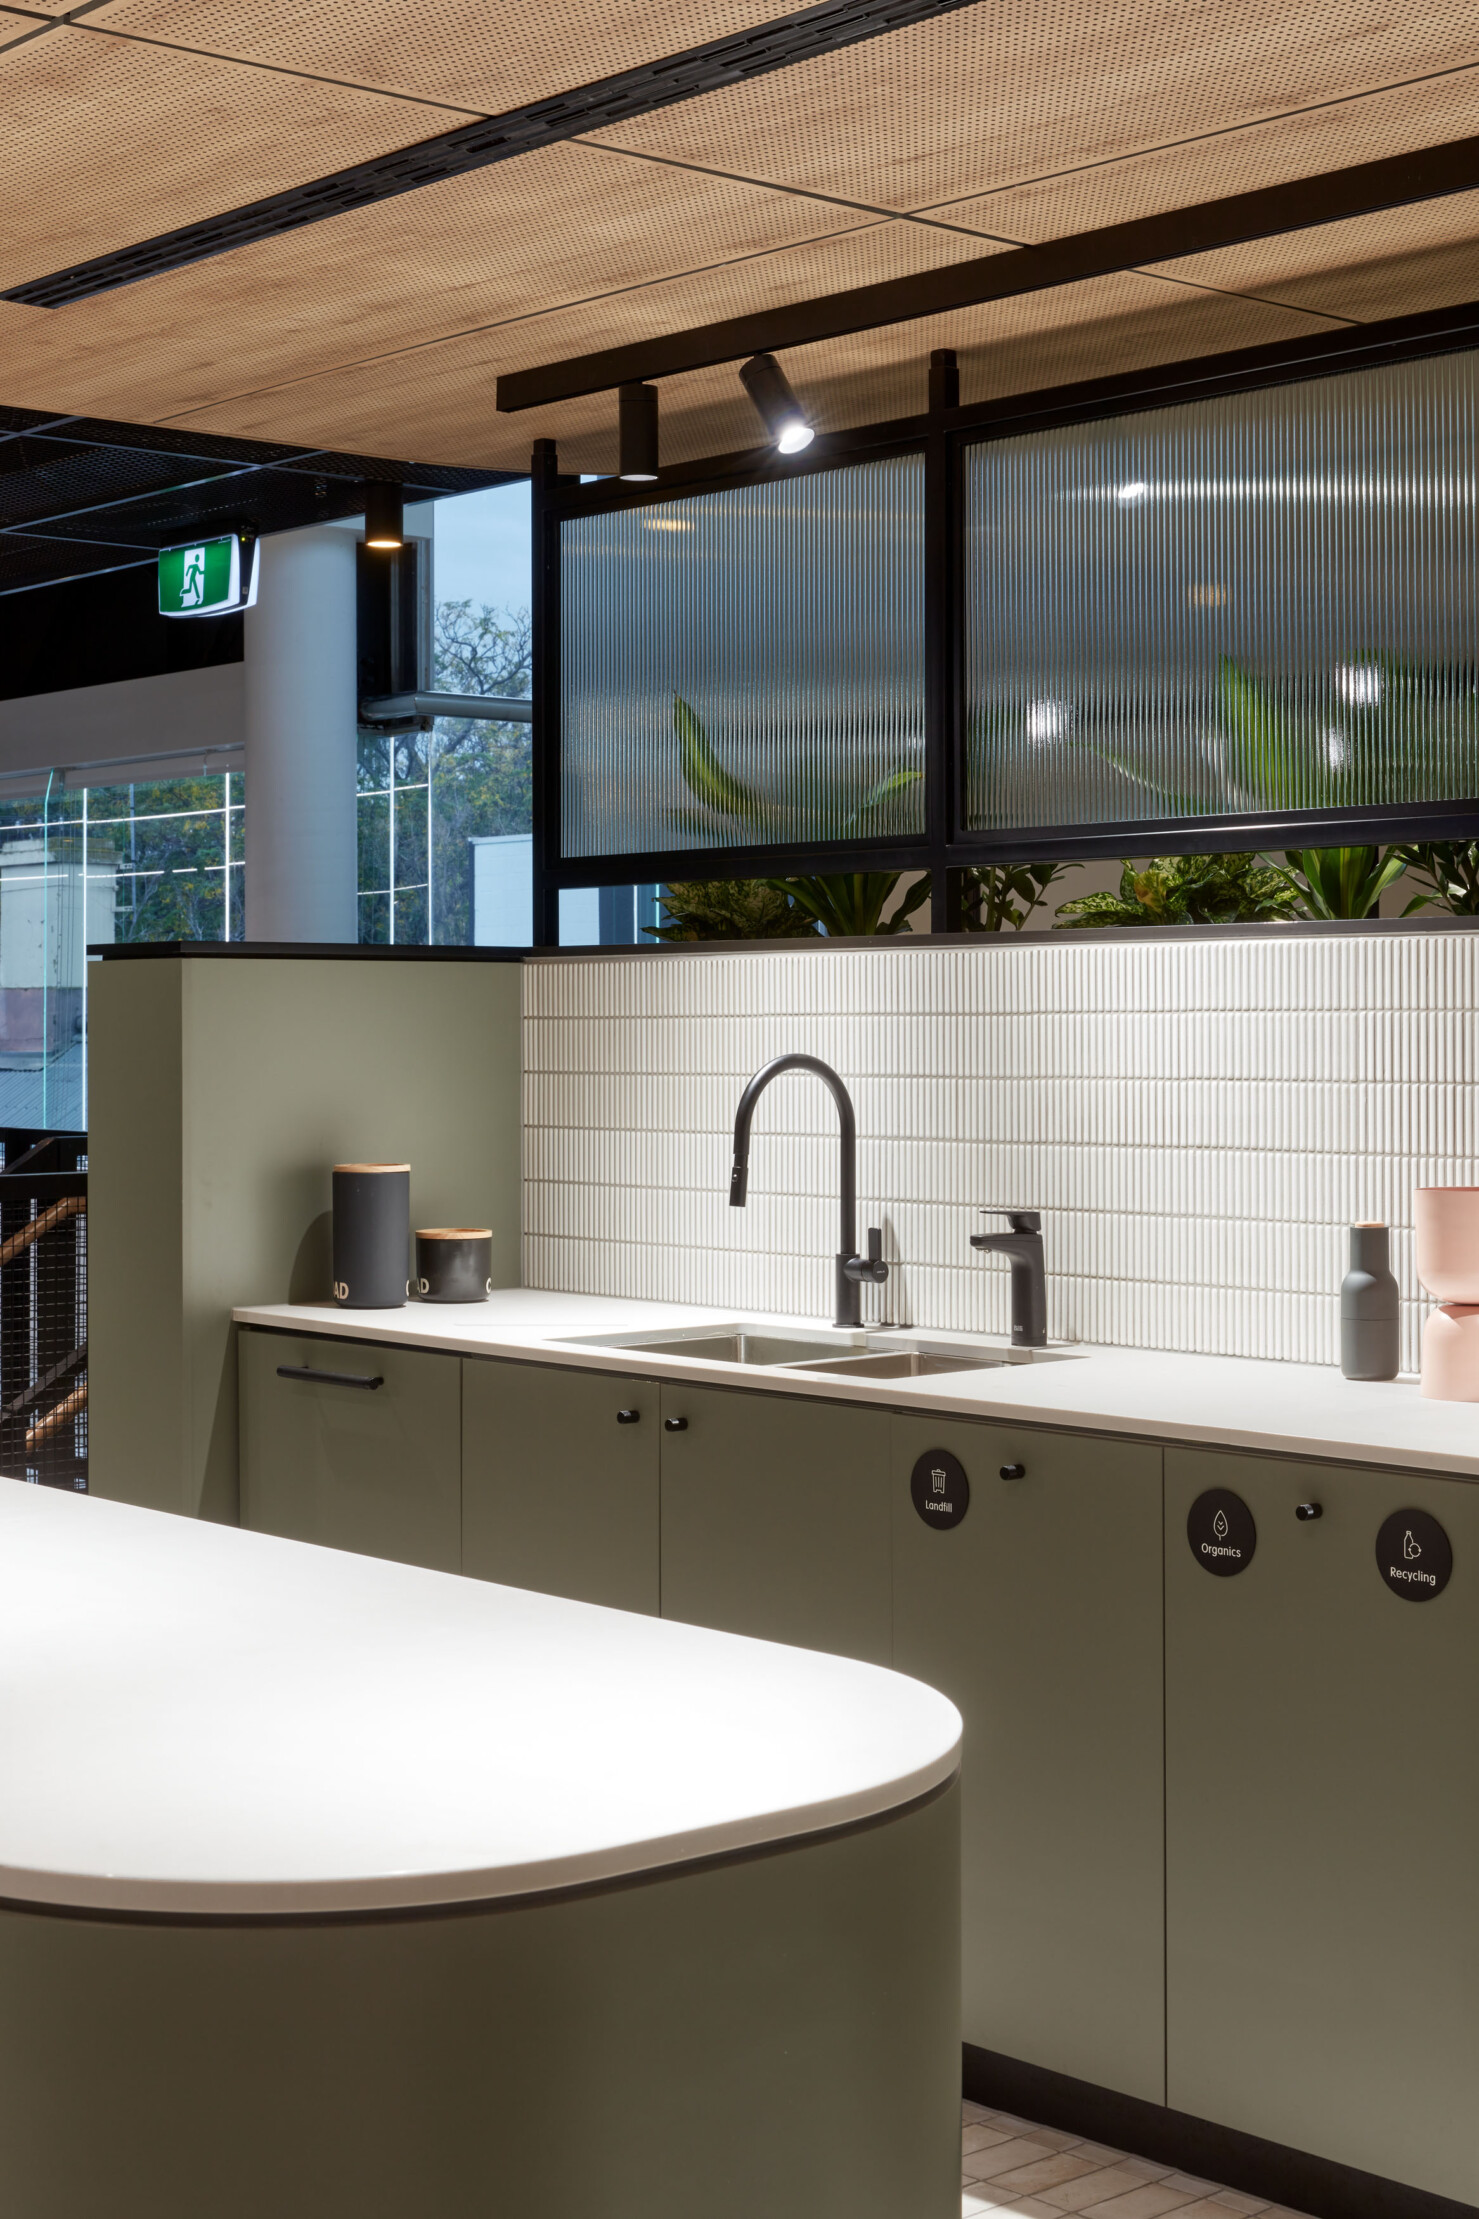 A tea point on the upper level provides a central kitchen for food preparation featuring matt black tapware and white tile splashback. The appliances and waste disposal systems are all hidden away behind pale green joinery. A planter box and glazed screen separate the space from the amenities.